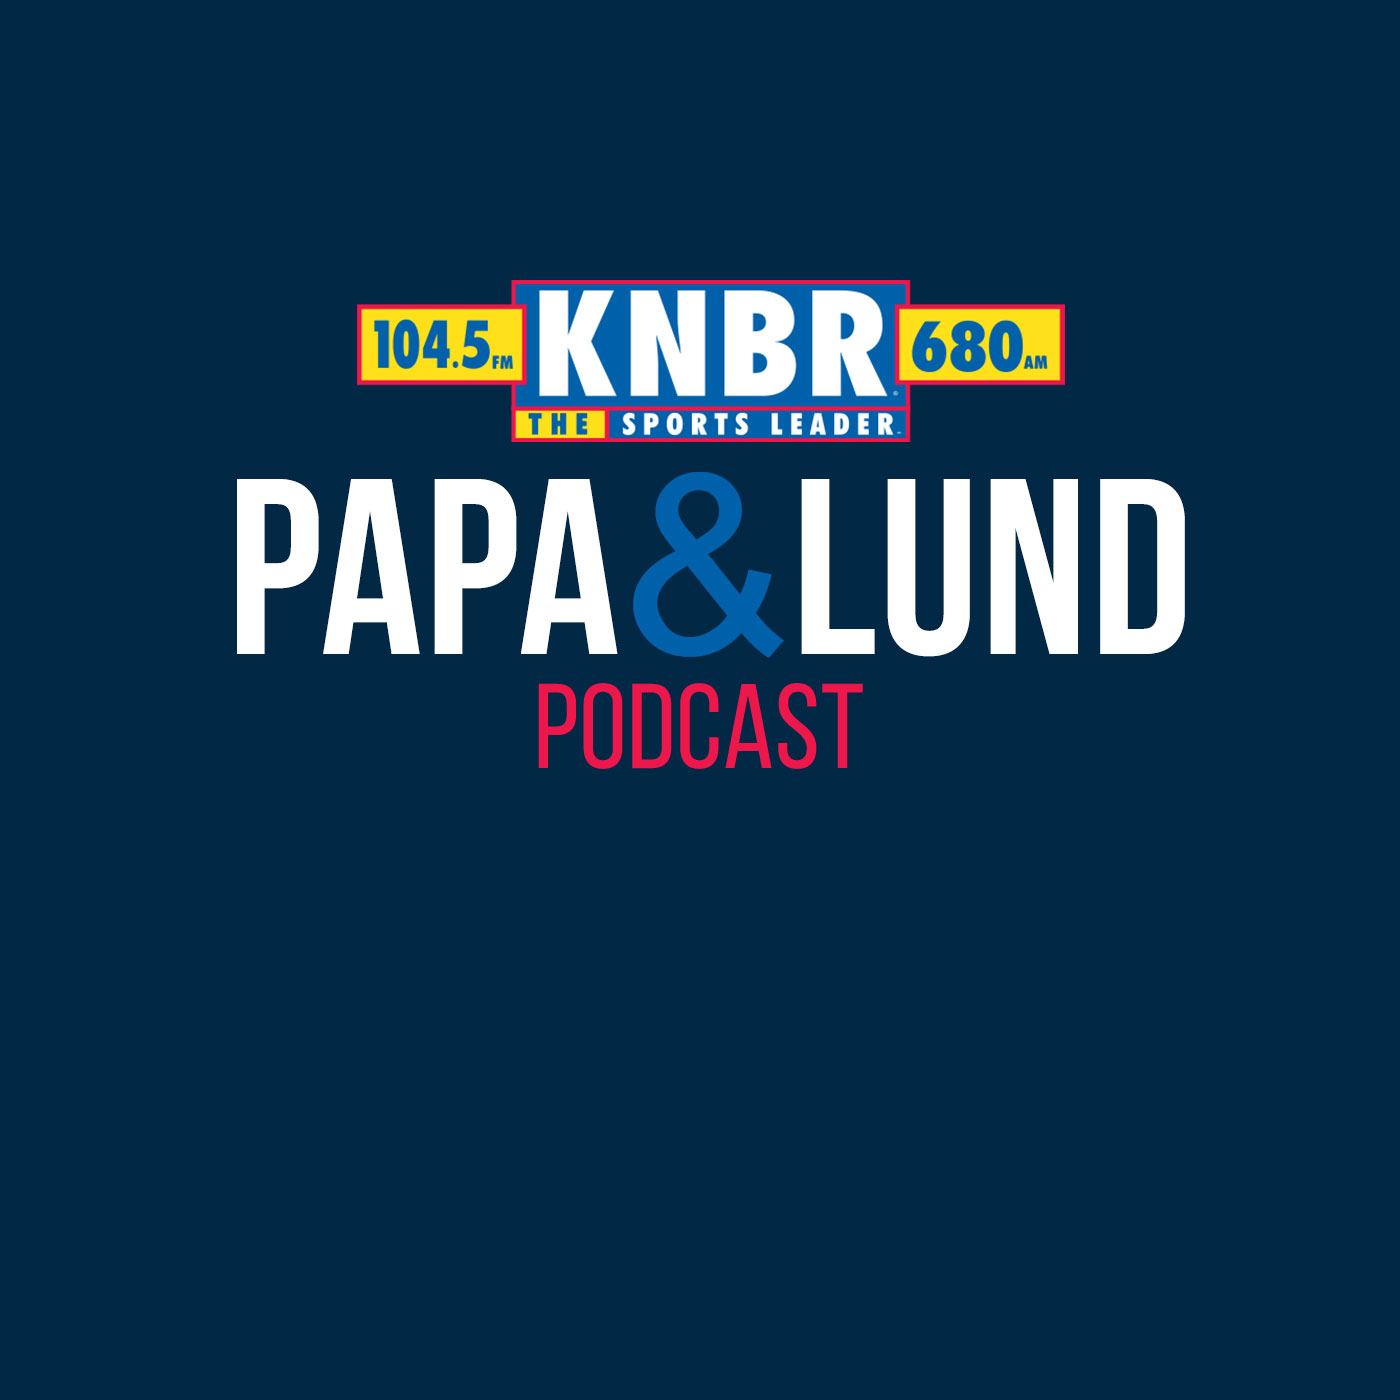 3-14 Cynthia Frelund joins Papa & Lund to discuss the big winners of NFL Free Agency and how the 49ers have improved with their latest additions